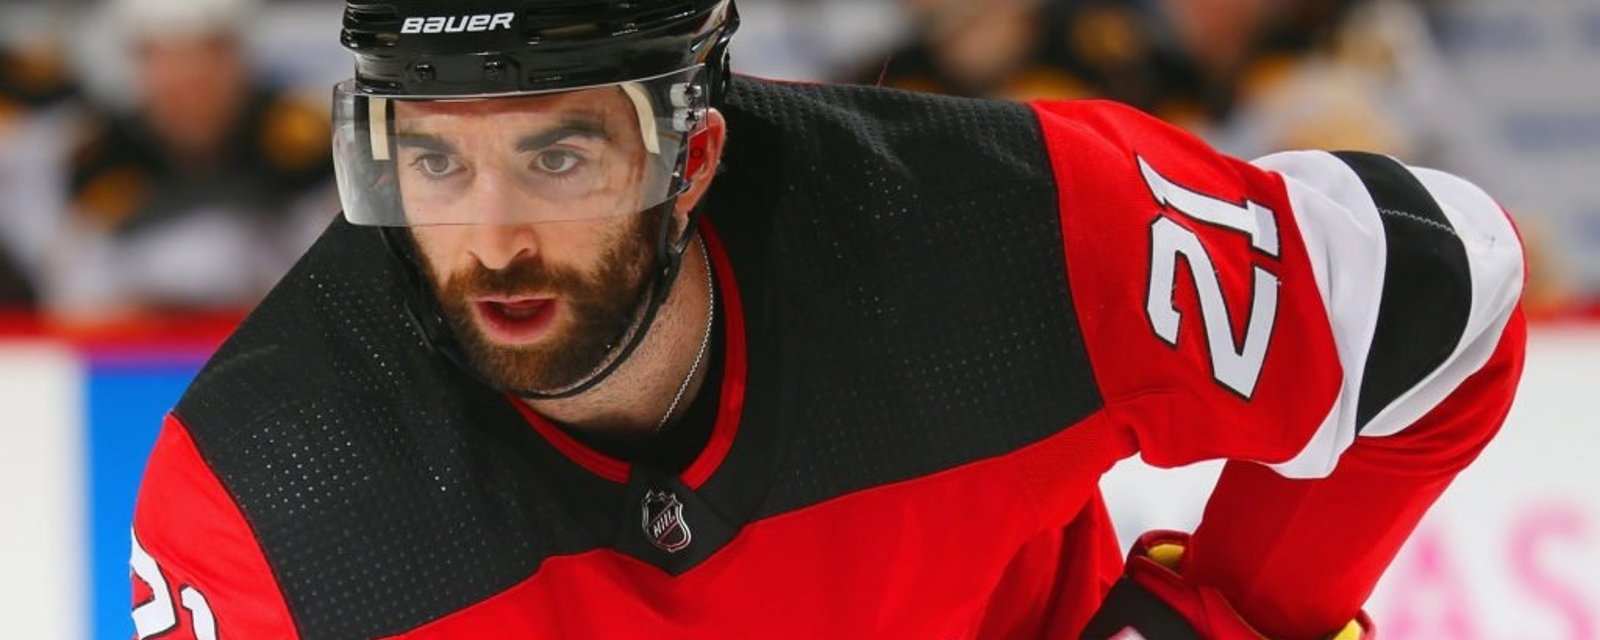 Rumor: No deal for Kyle Palmieri, trade imminent,